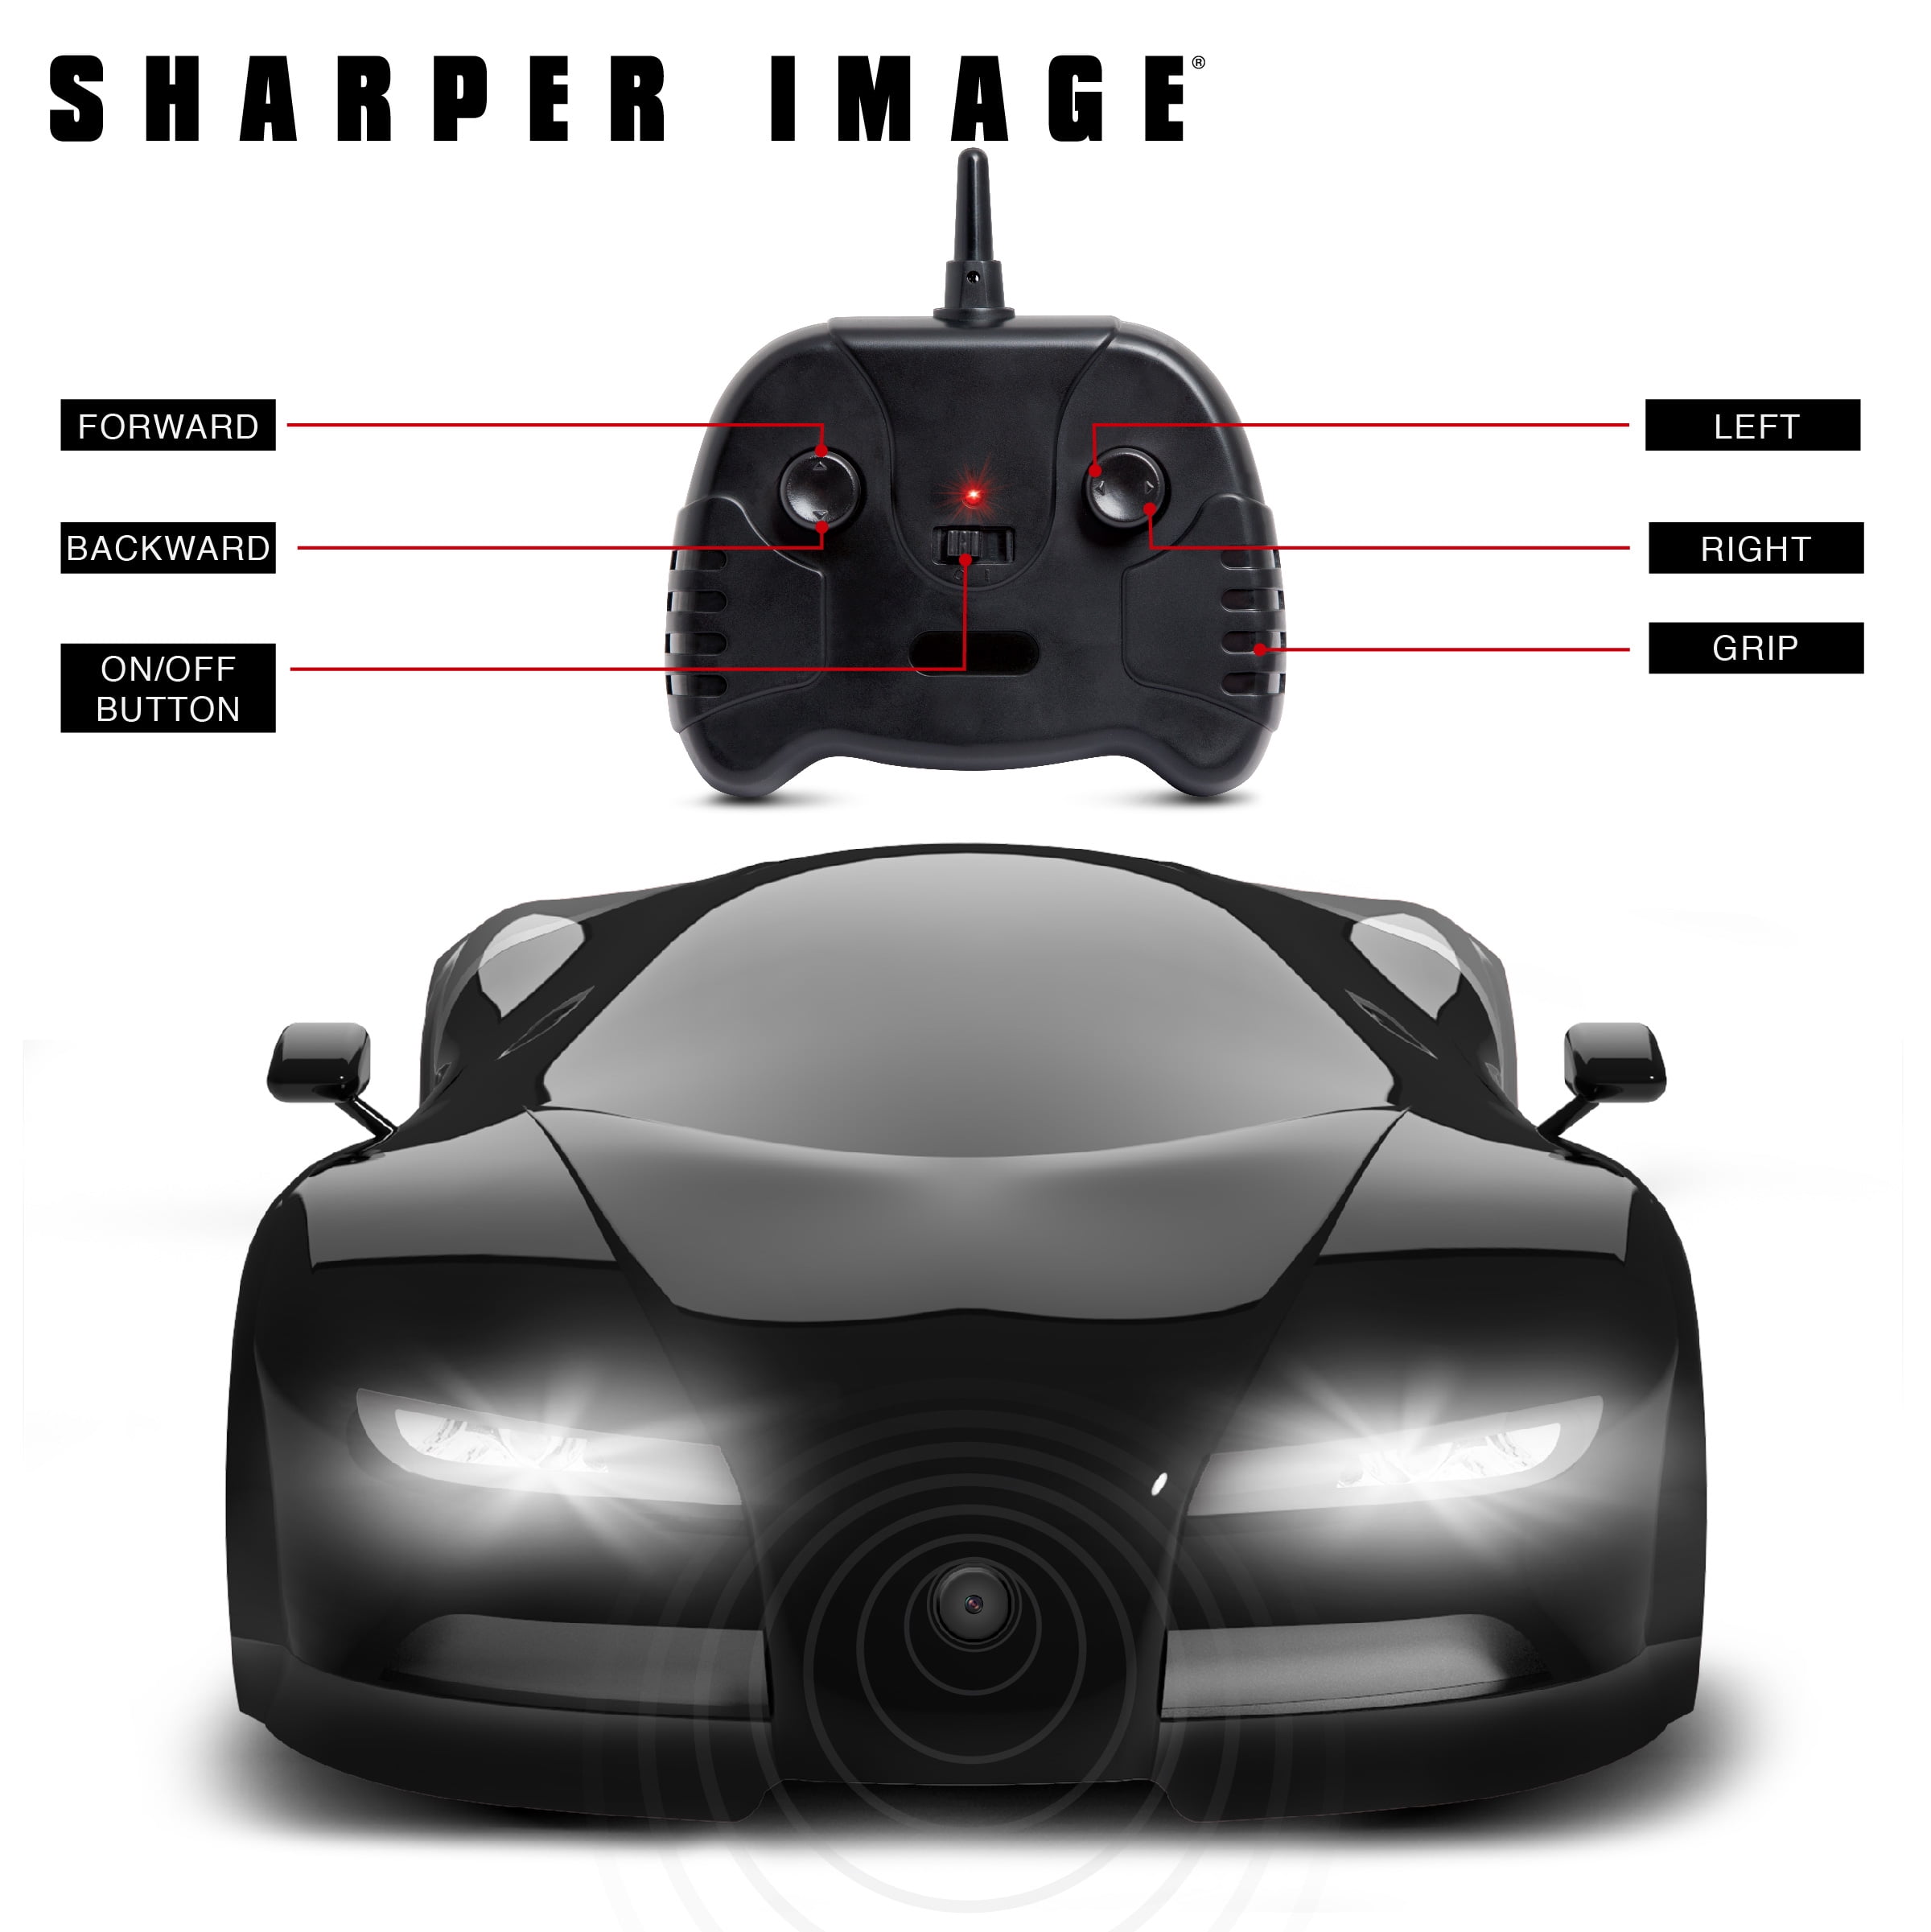 SHARPER IMAGE Remote Control Italia Sports Car with Virtual Reality Headset ... 